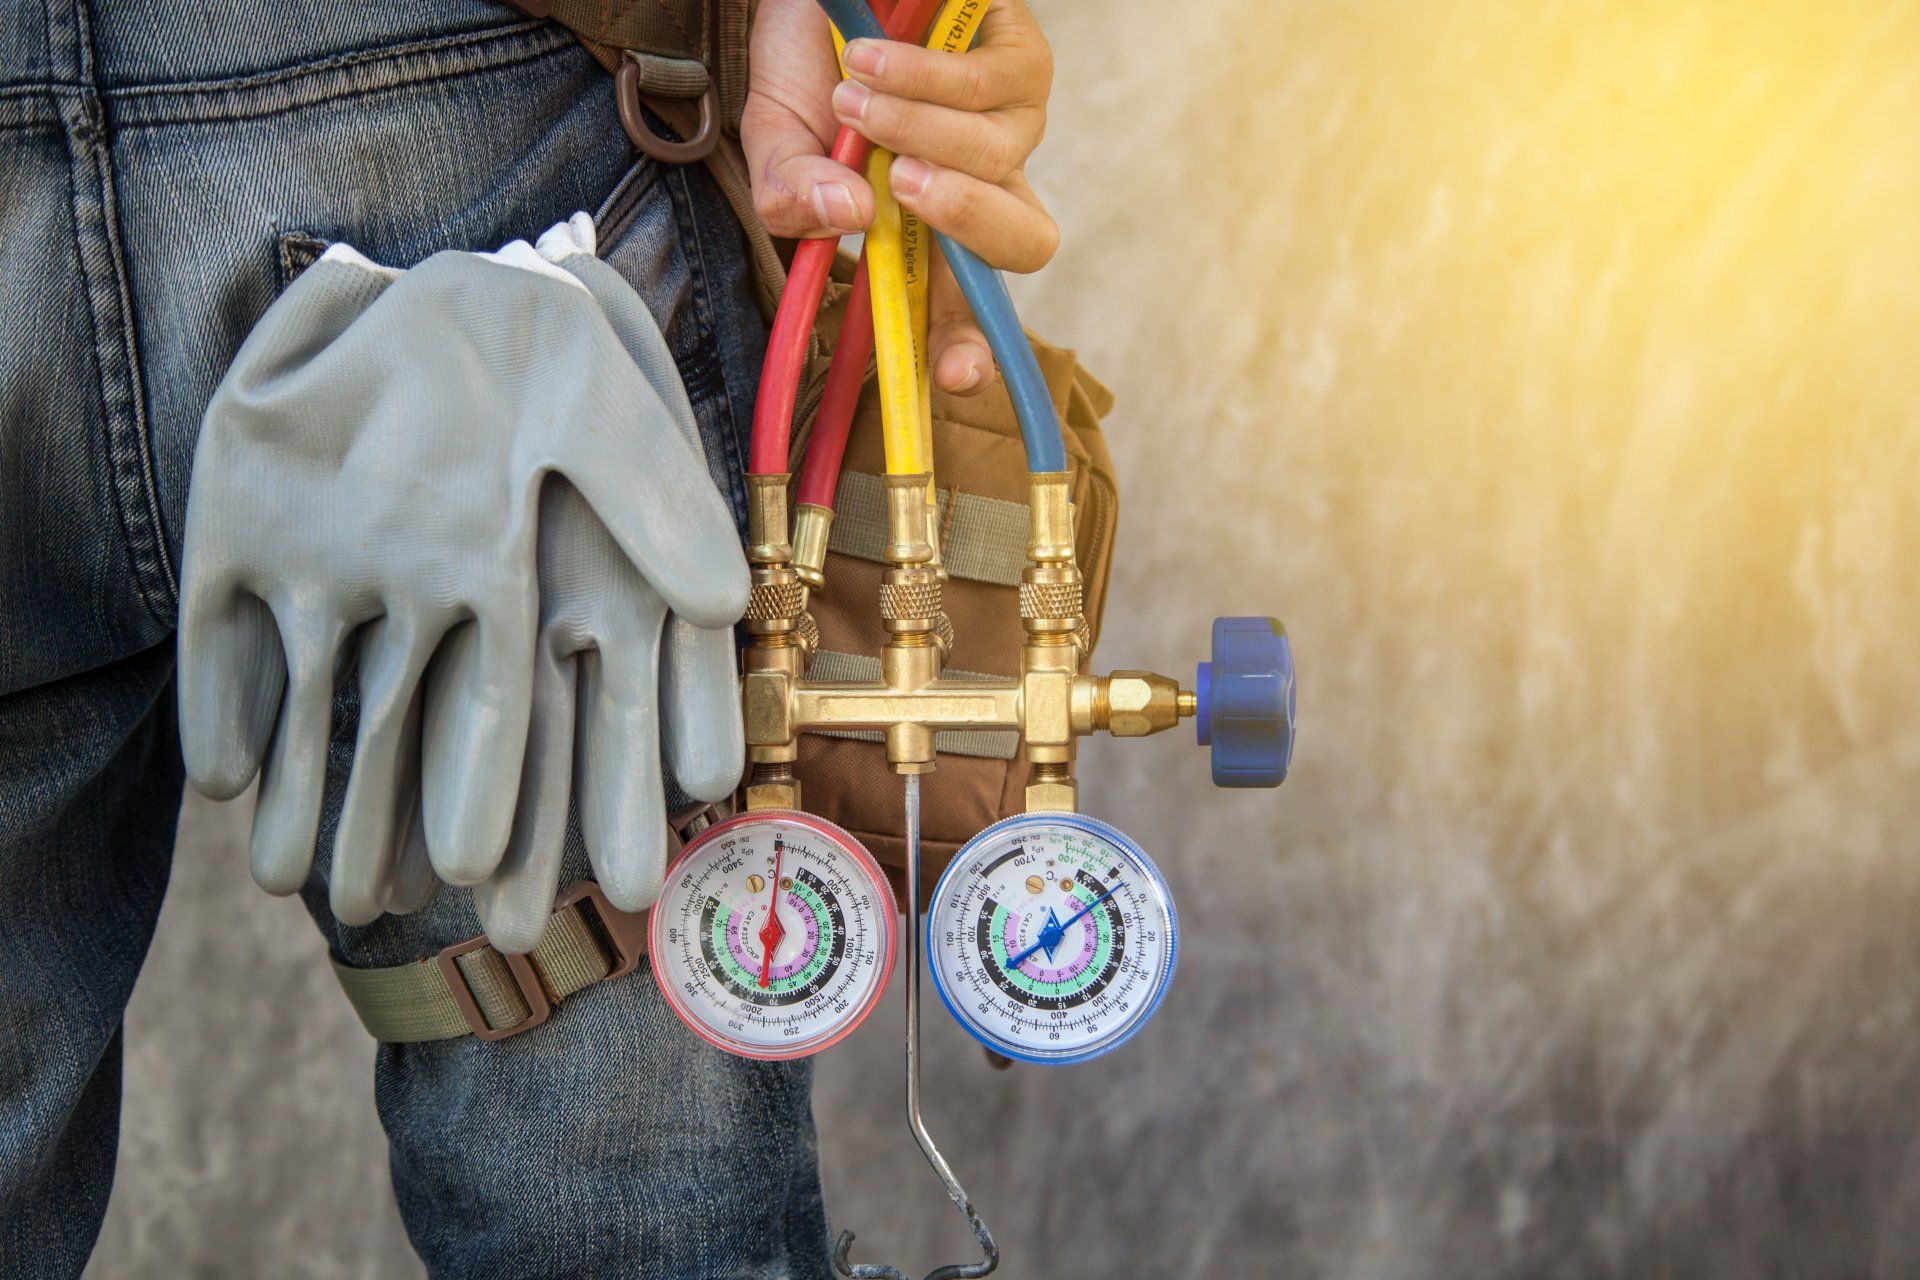 HVAC contractor wearing a tool belt and holding a manifold gauge.